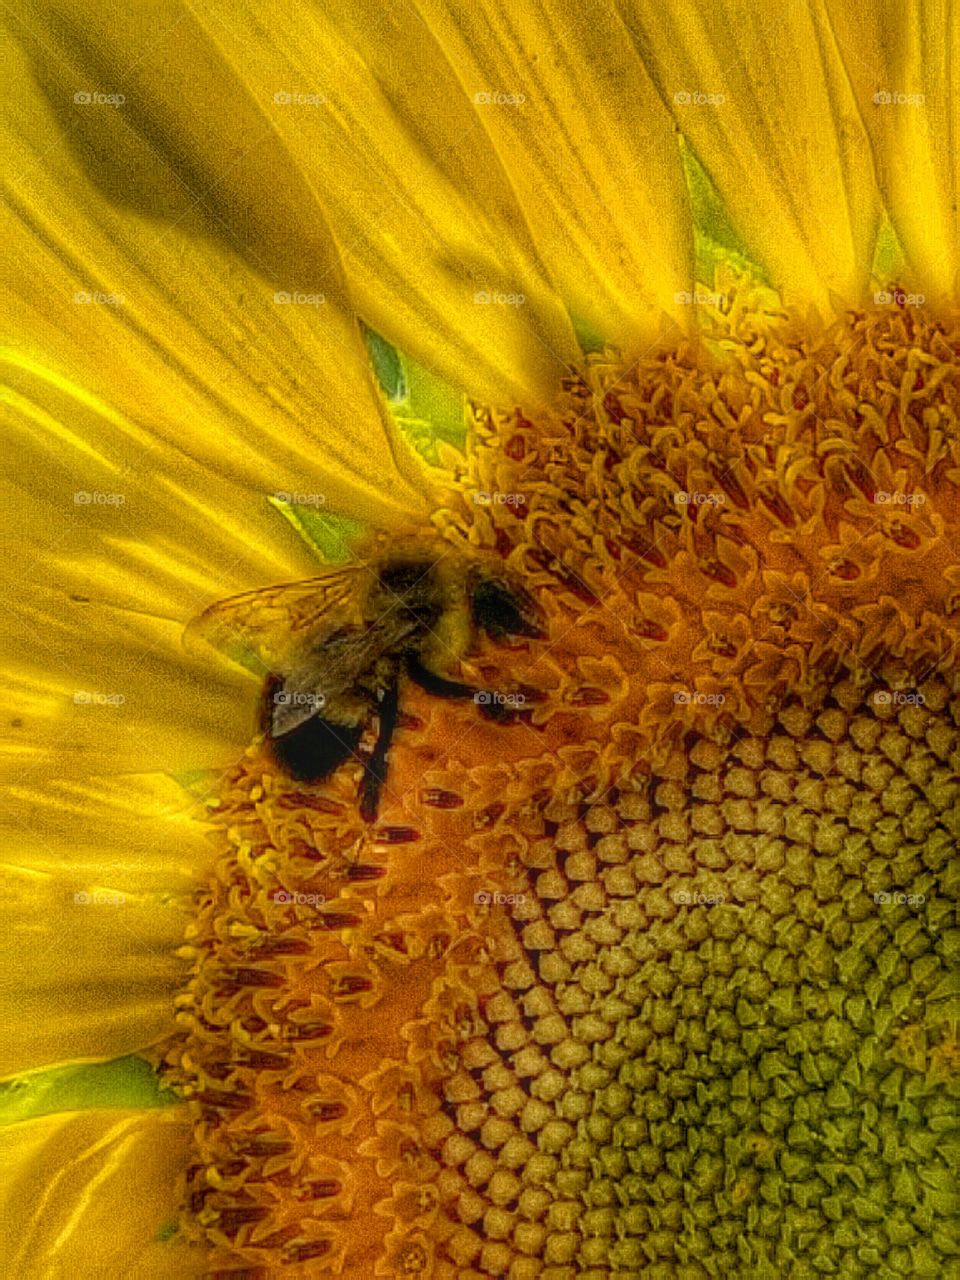 Extreme close-up of a bee on a sunflower